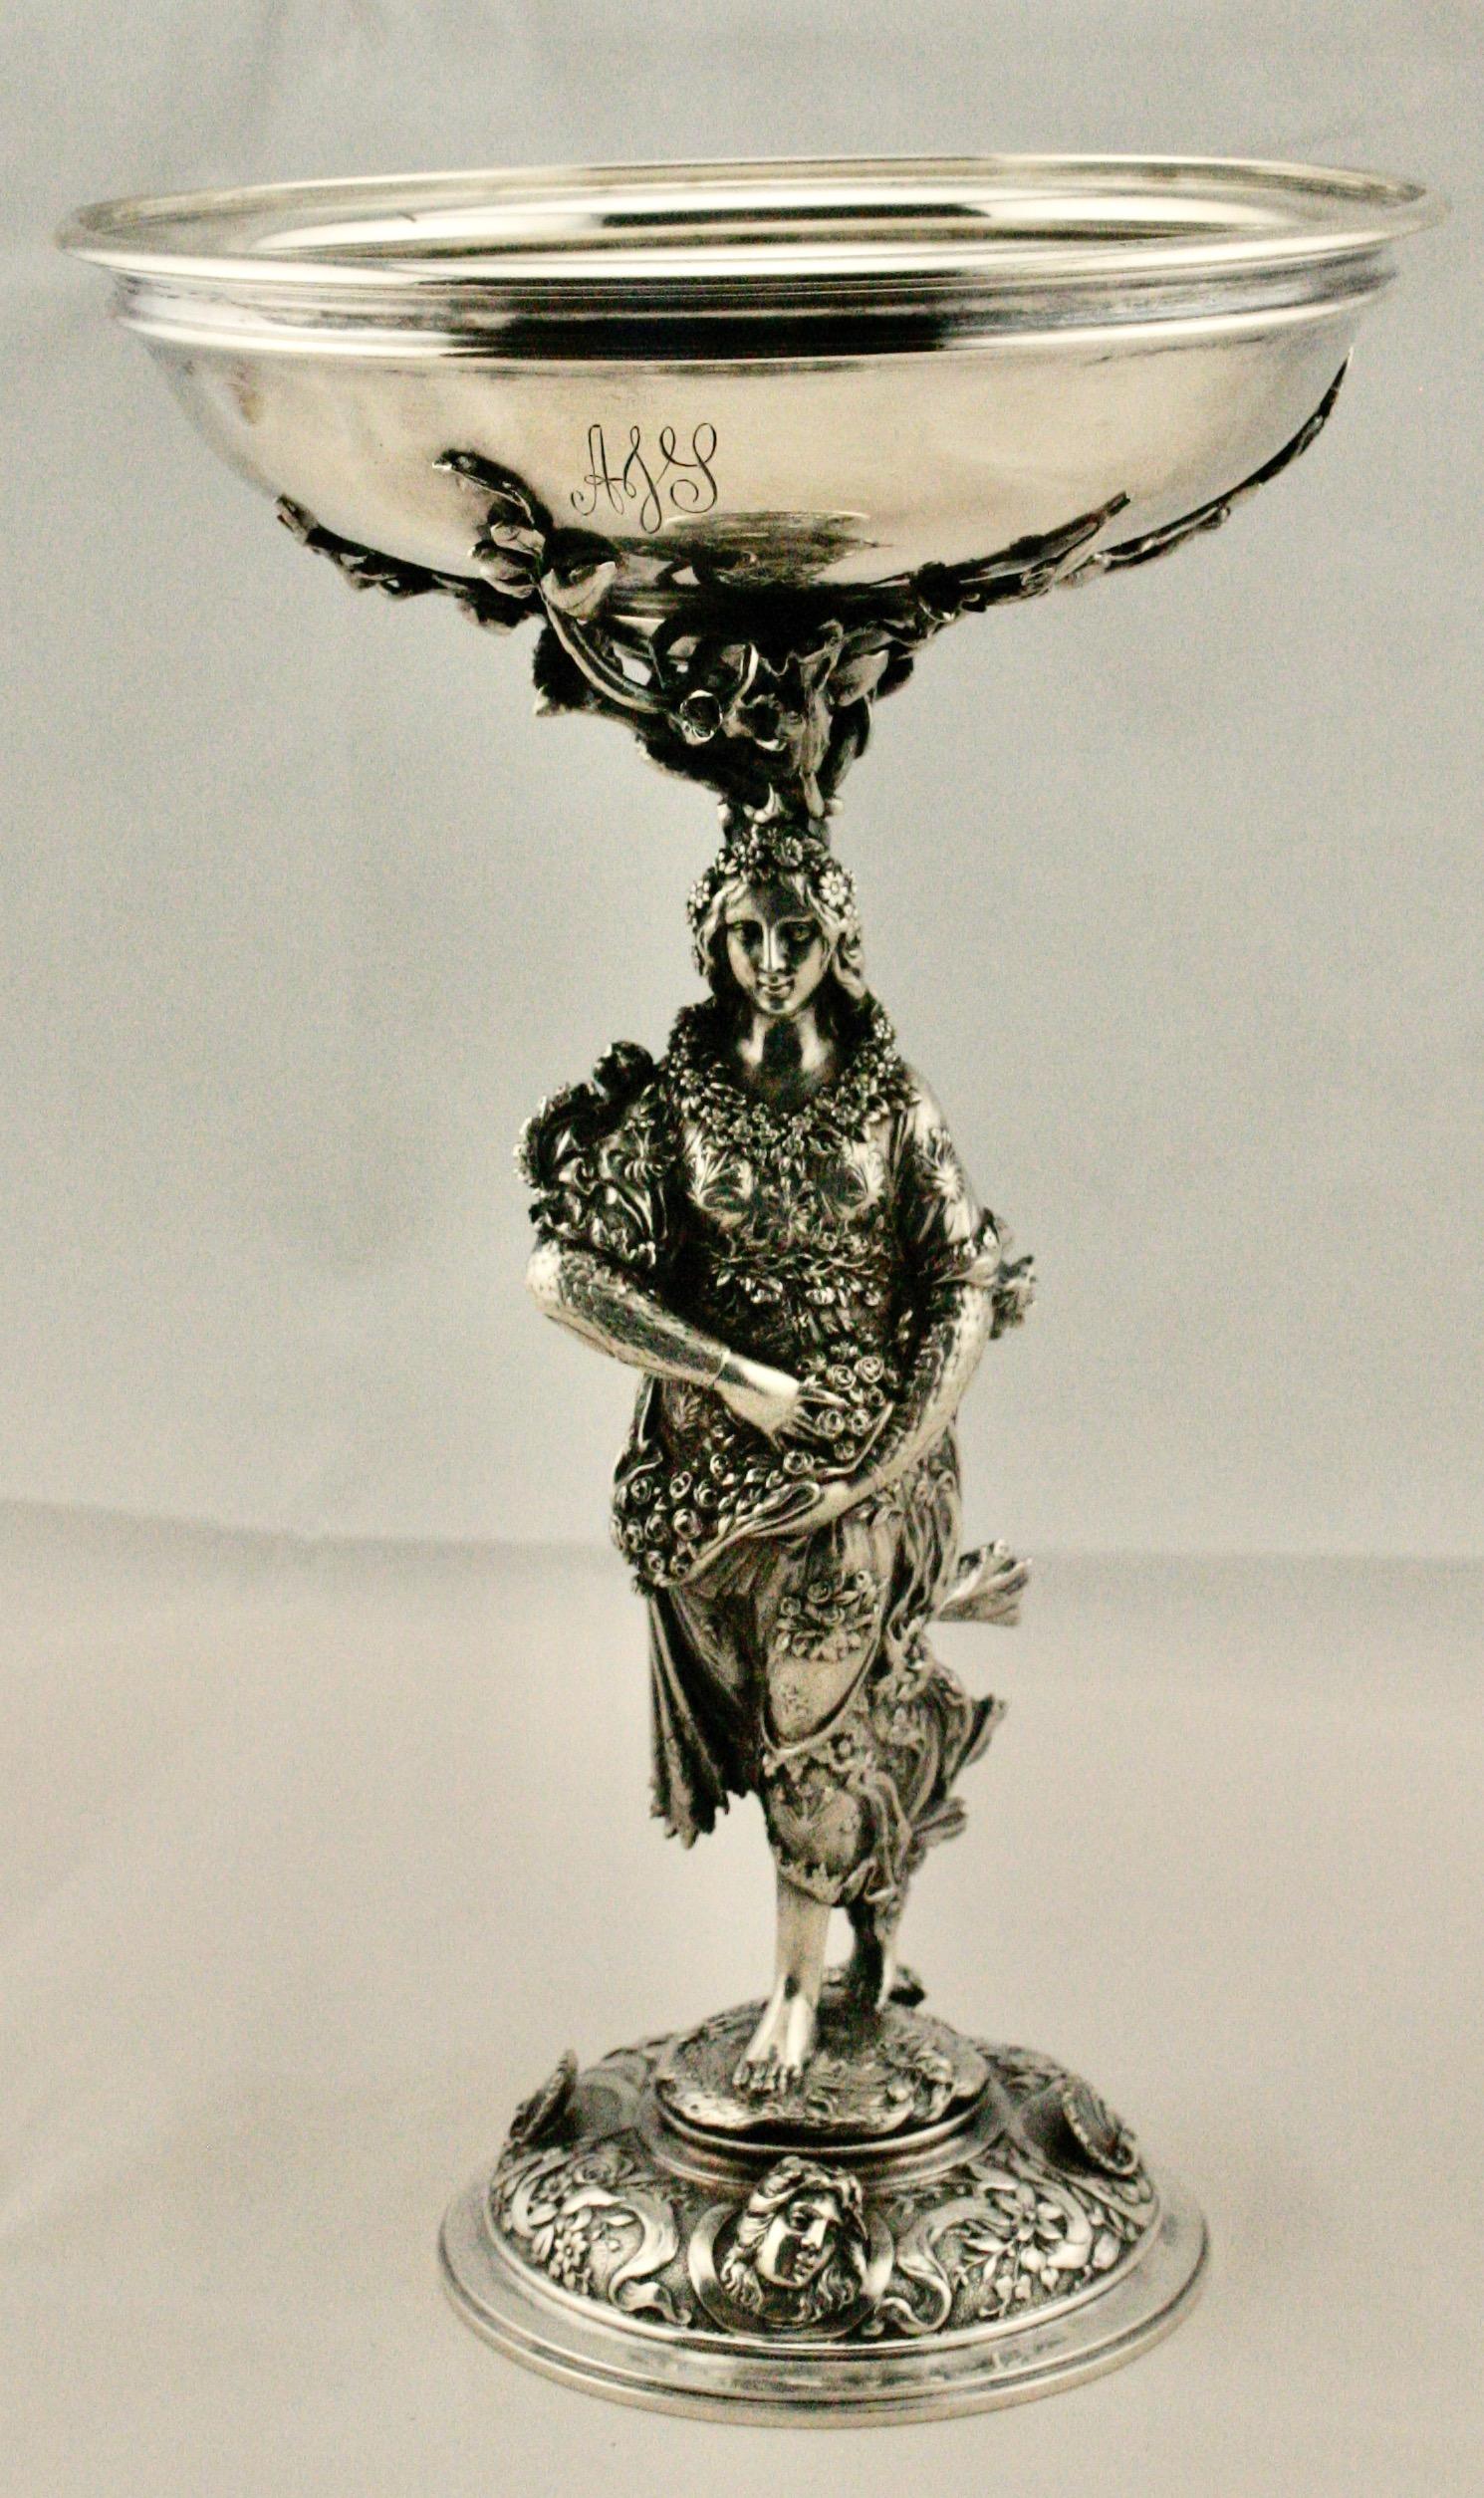 Italian silver compote late 19th century, with mark of G. Accarisi of Firenze/Florence. The compote is in the form of a shallow bowl held aloft by a model of Flora based on the painting Primavera by Sandro Botticelli. It is raised on a domed